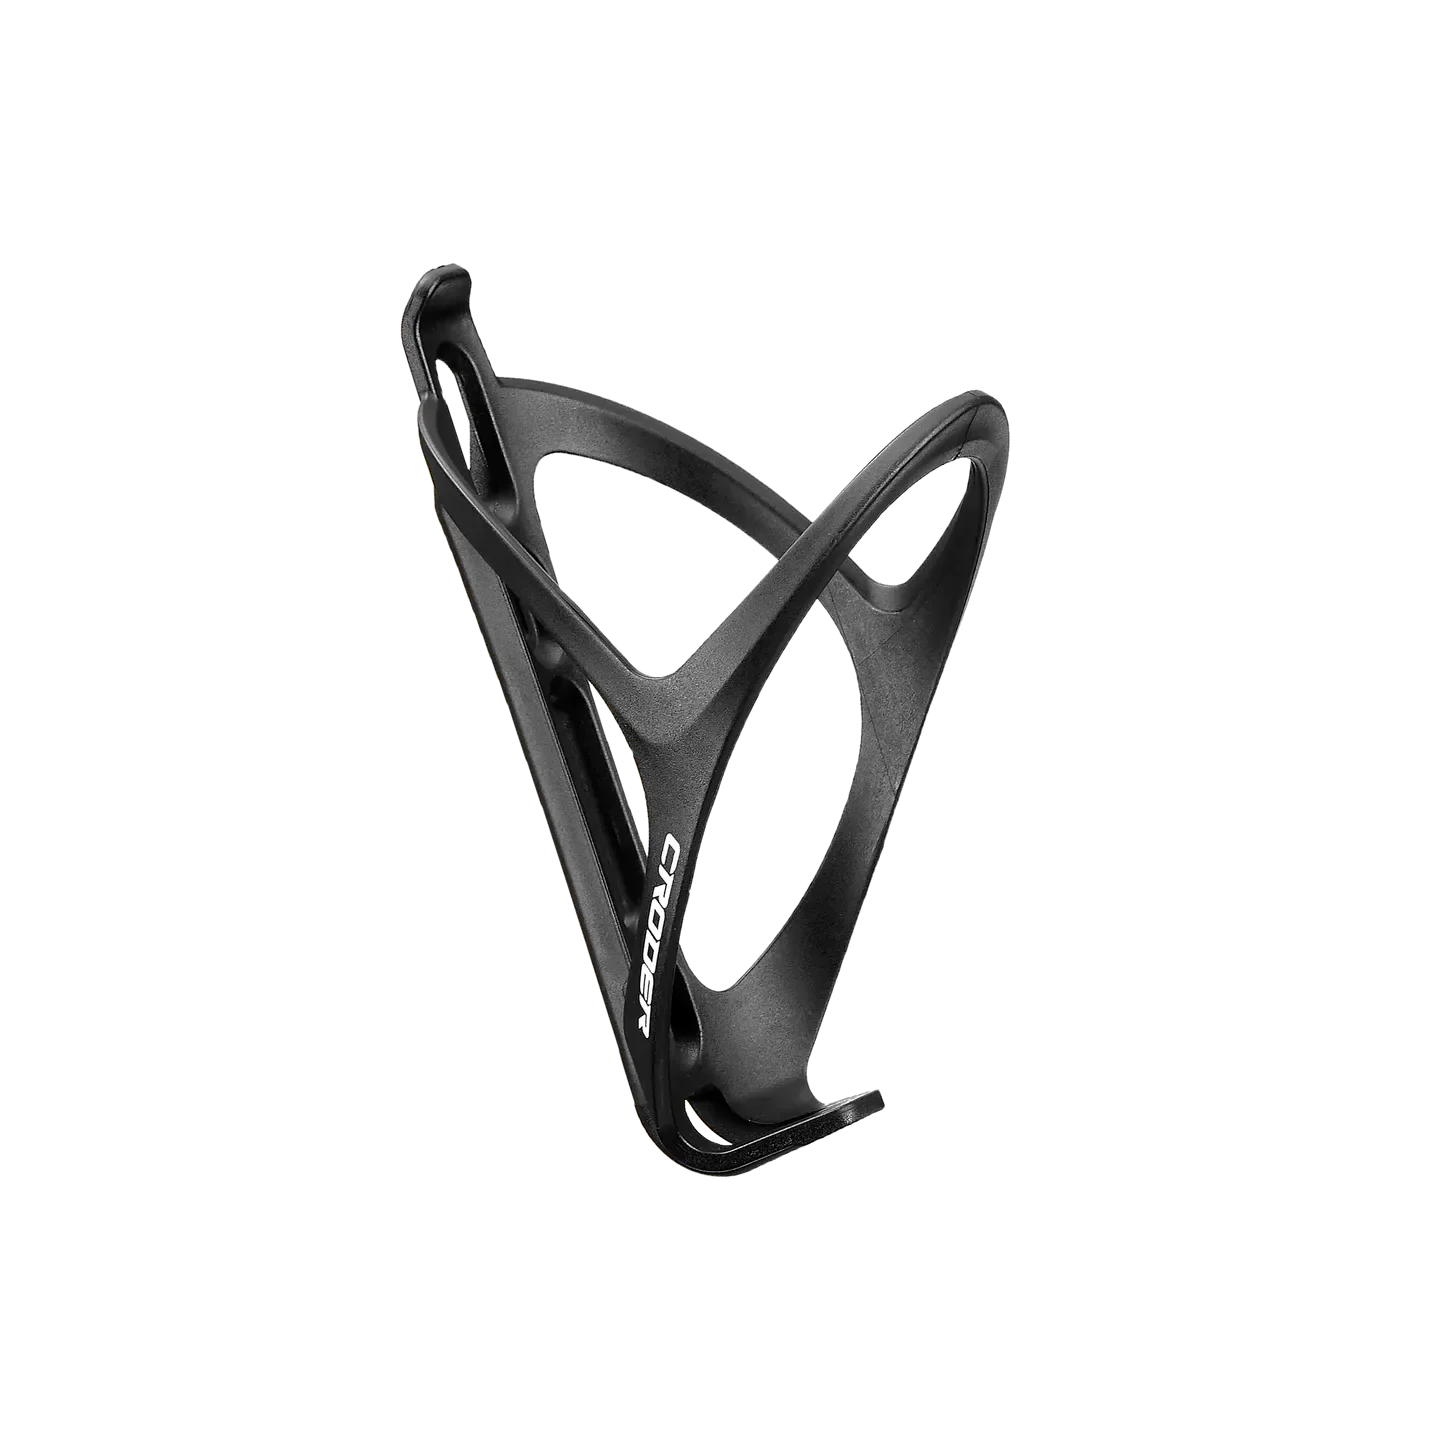 TIC-5 Bottle Cage